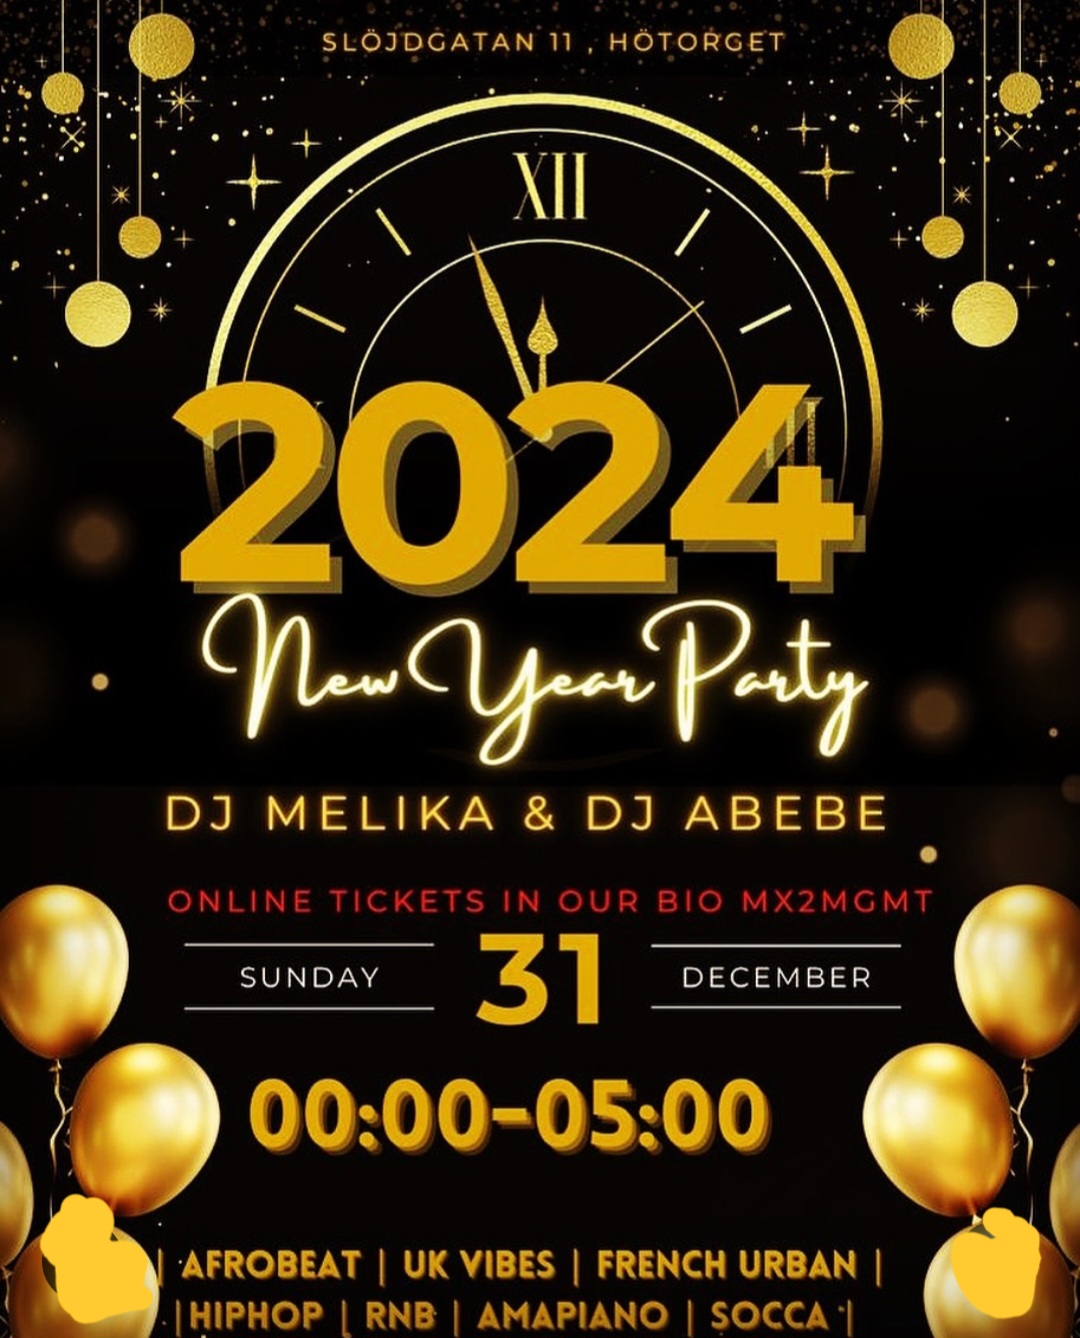 KLUBB! 2024 New years party! (STOCKHOLM)